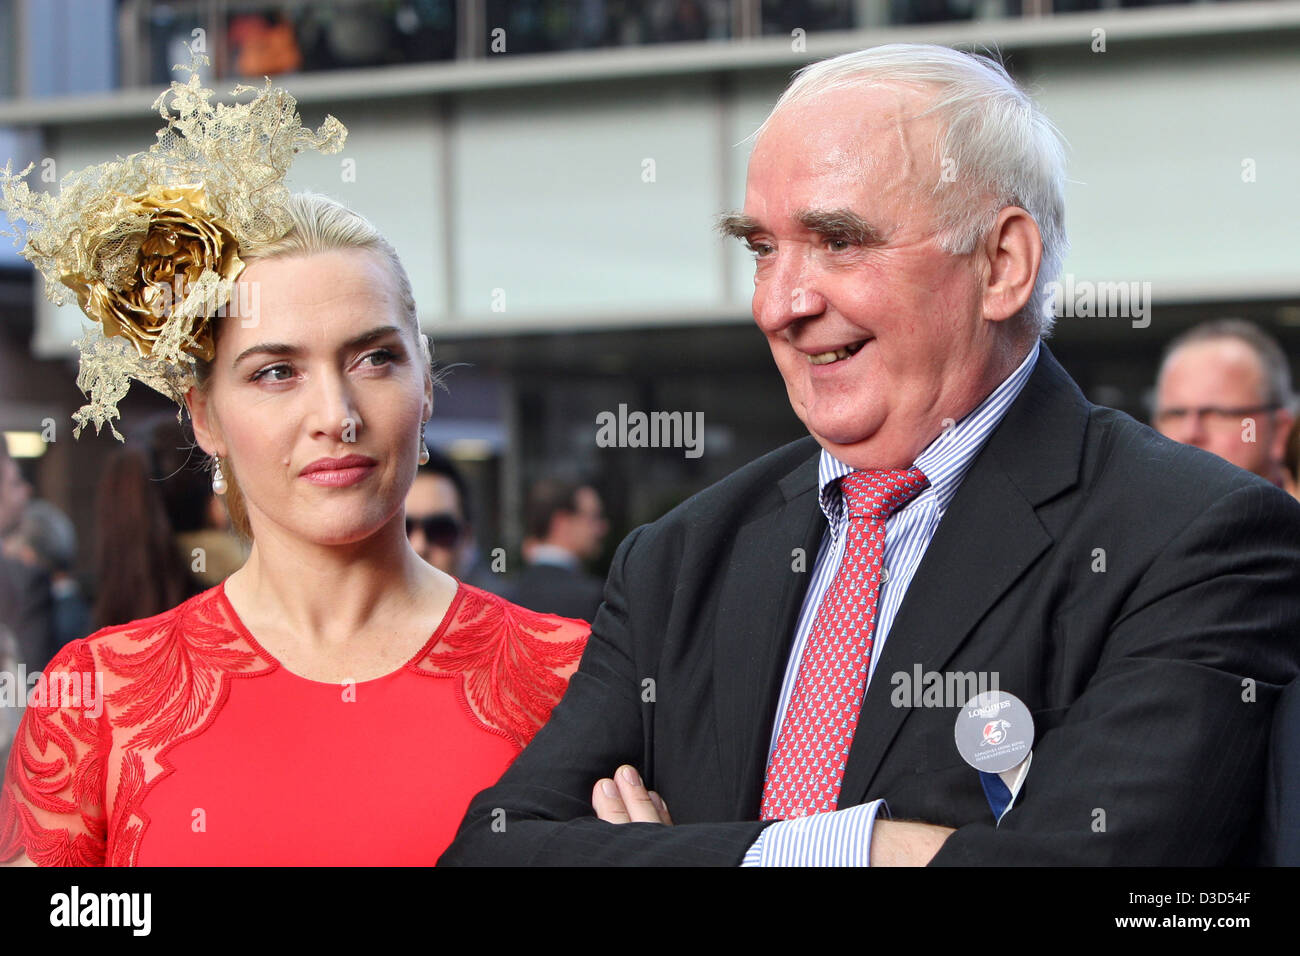 Hong Kong, China, Kate Winslet, actress, and Walter von Kaenel, president of watchmaker Longines Stock Photo